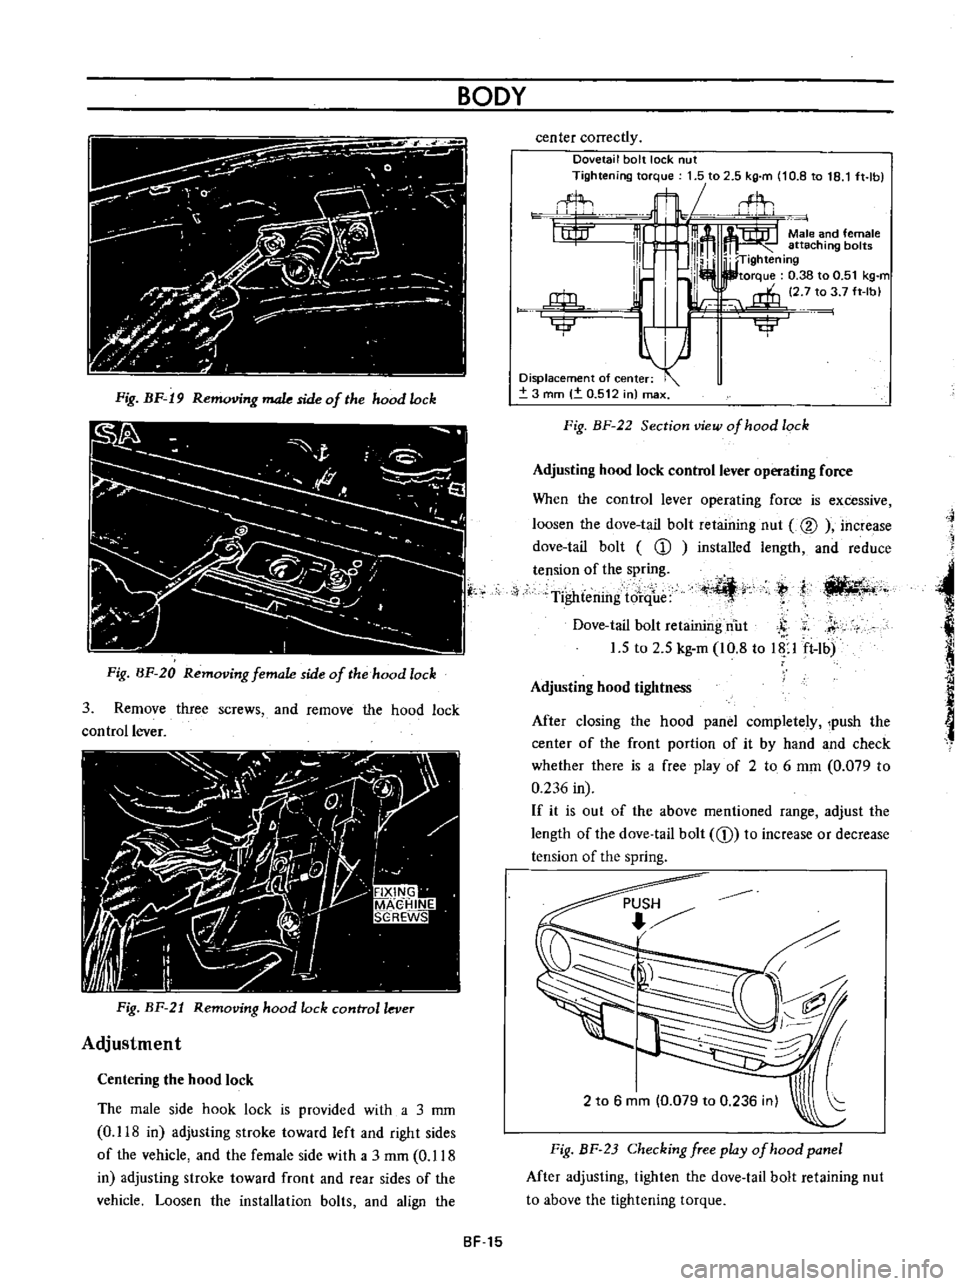 DATSUN B110 1973  Service User Guide 
BODY

Fig 
BF 
19 
R

g 
male 
side

of 
the

hood 
lock

Fig 
BF 
20

Removing 
female 
side

of 
the 
hood 
lock

3

Remove 
three

screws 
and

remove 
the

hood 
lock

control 
lever

Fig 
BF 
21